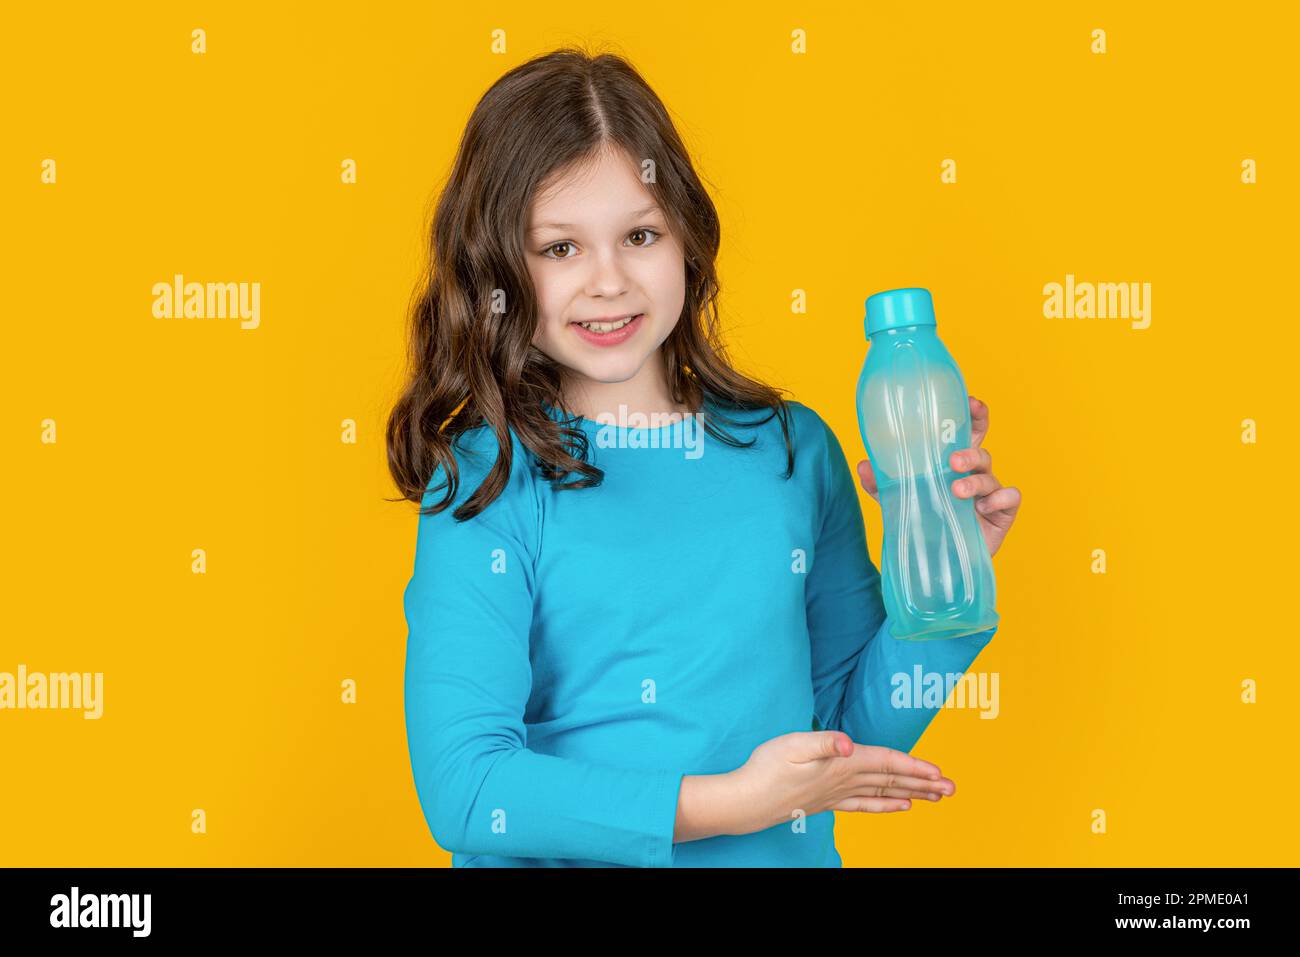 https://c8.alamy.com/comp/2PME0A1/child-presenting-sport-bottle-on-yellow-background-2PME0A1.jpg